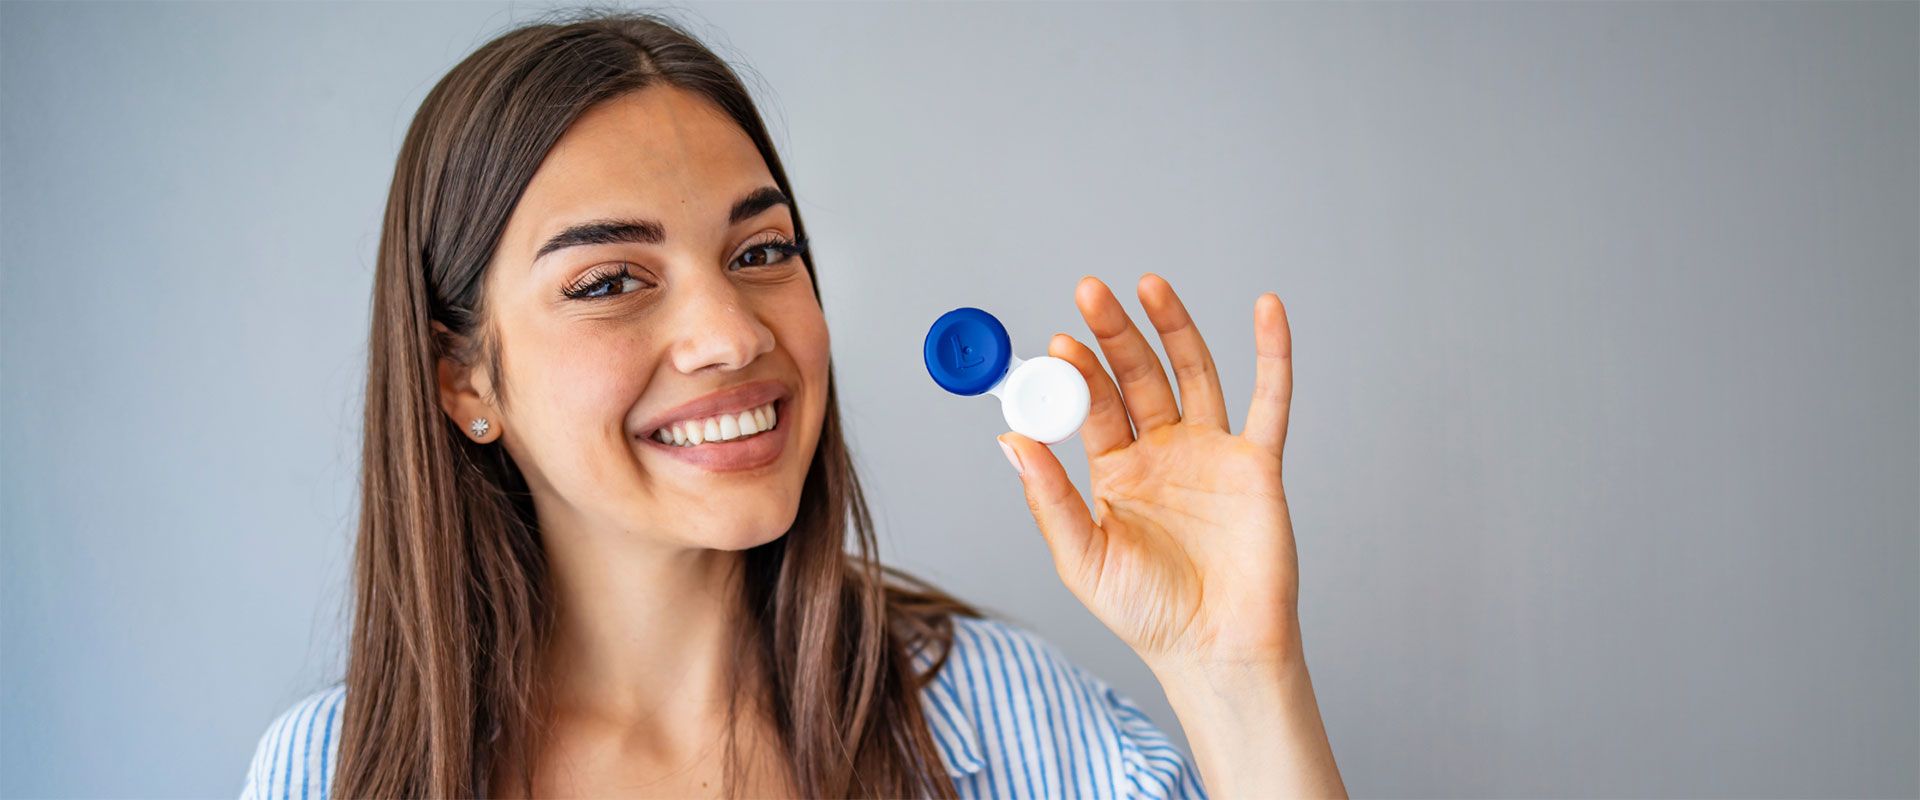 Top Tips for Contact Lens Wearers